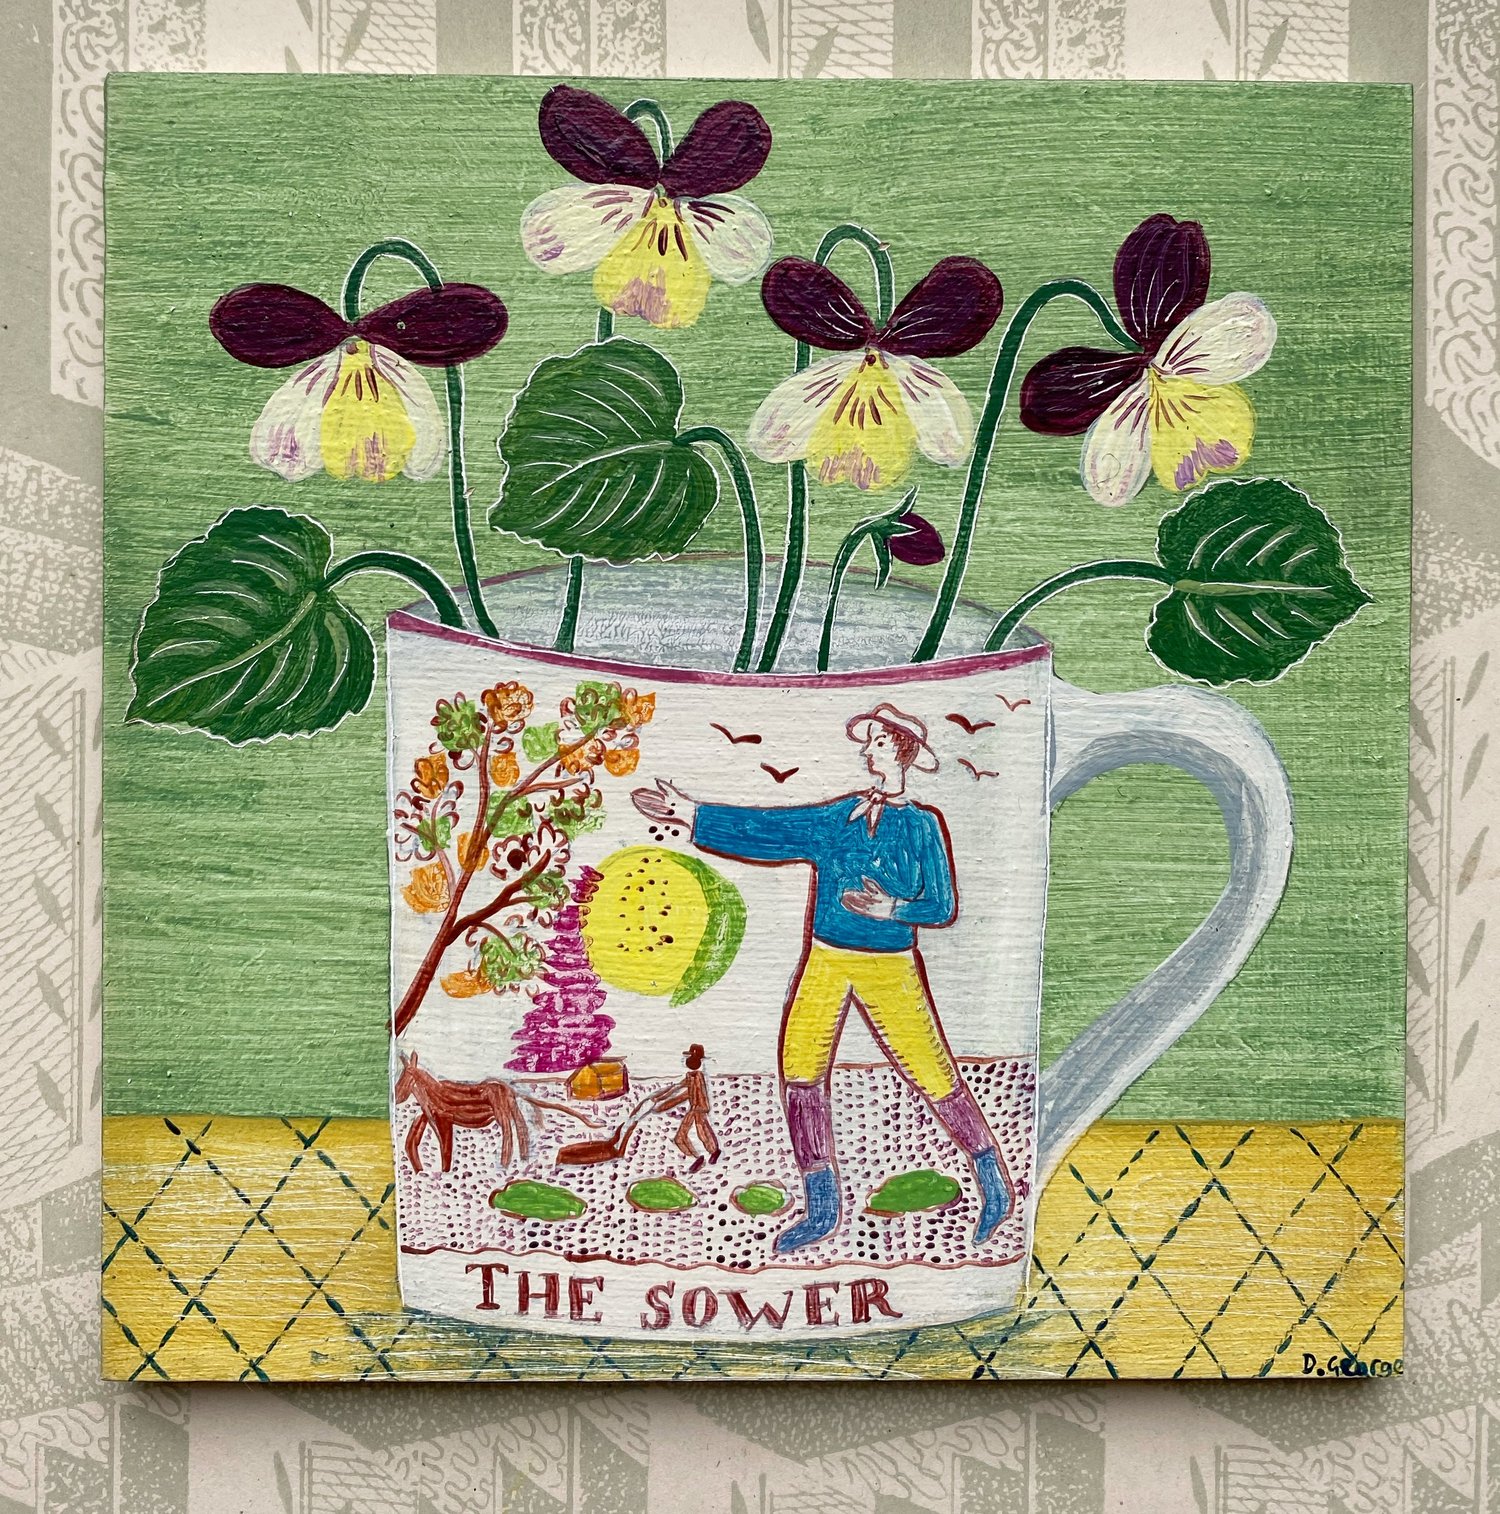 Image of Small Sower cup and Violas 